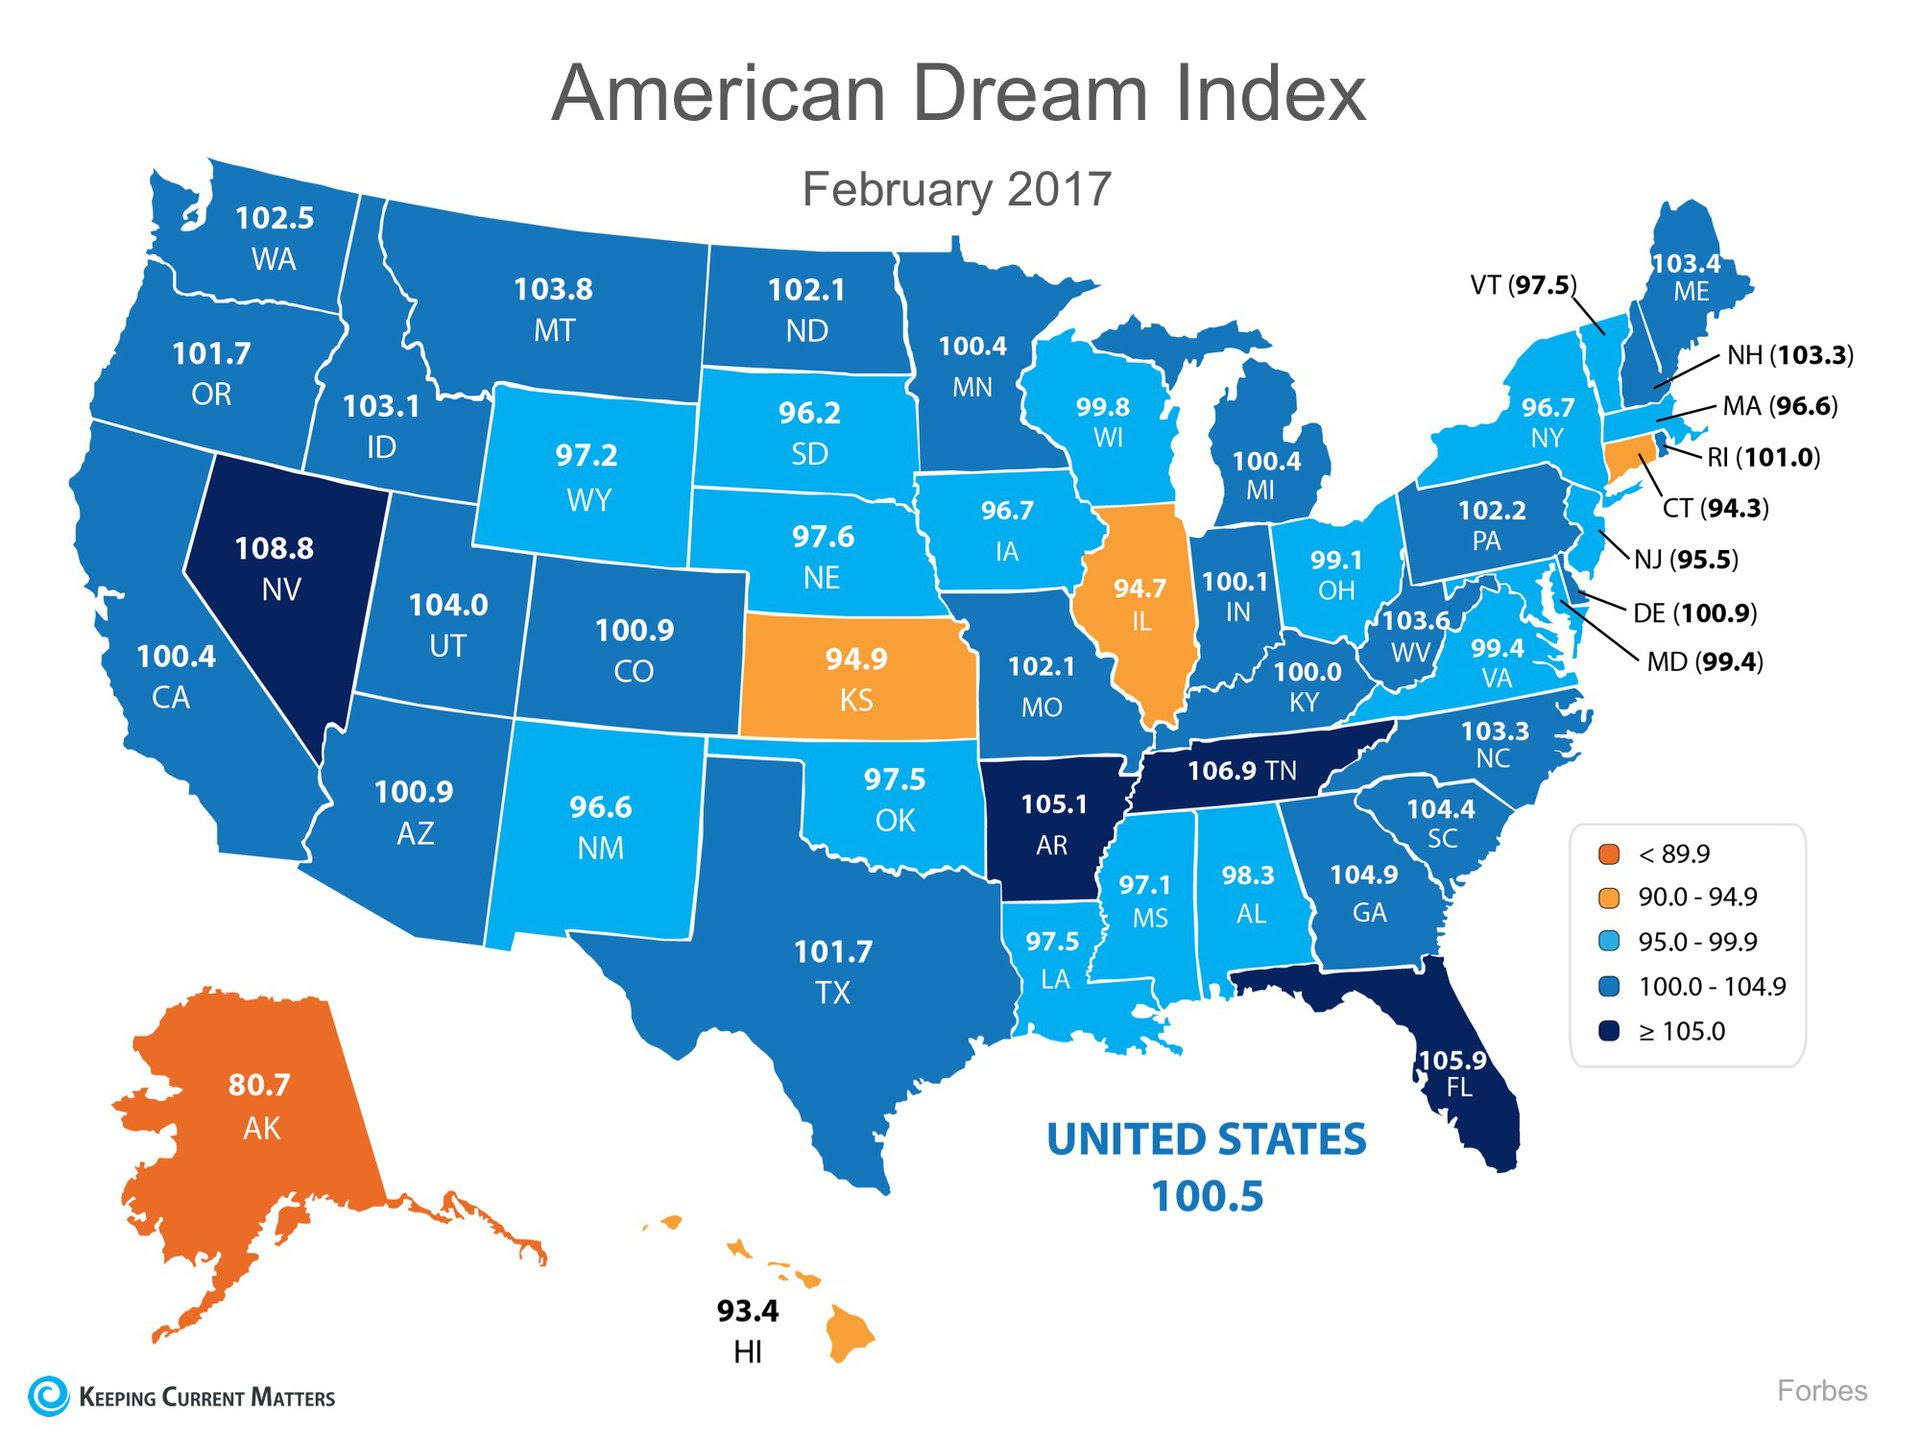 Measuring Your Ability to Achieve the American Dream | Keeping Current Matters